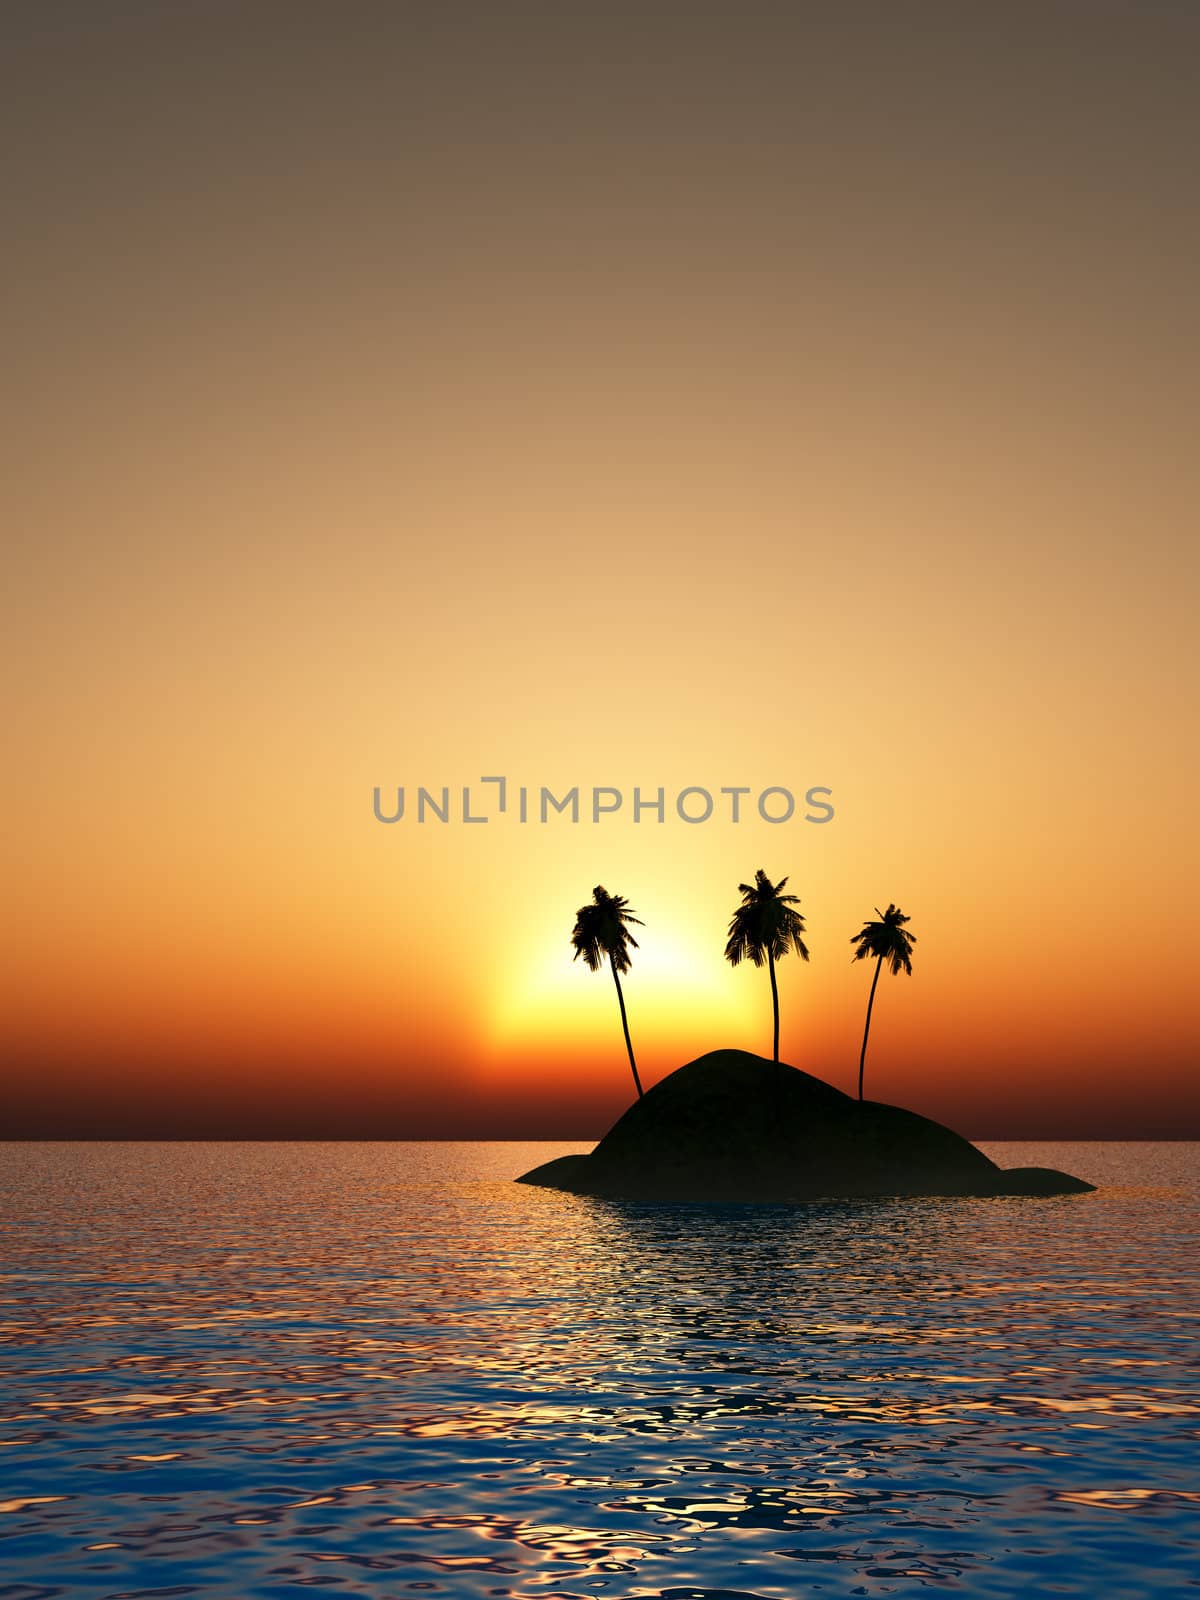 Illustration of a tiny tropical Island with three coconut trees against a sunset.